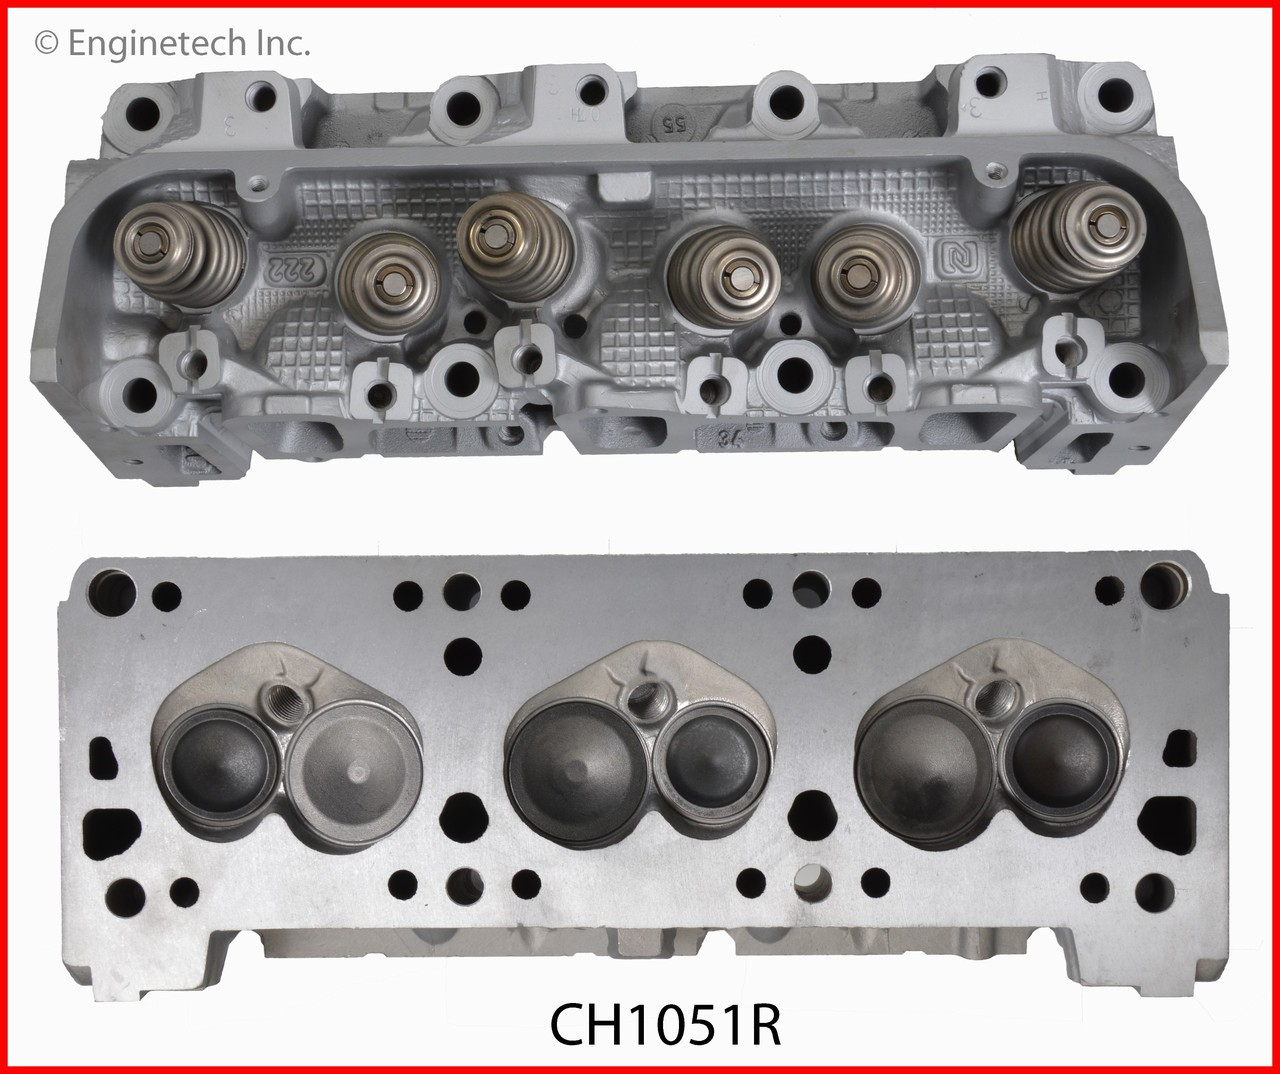 Cylinder Head Assembly - 2002 Chevrolet Impala 3.4L (CH1051R.D36)